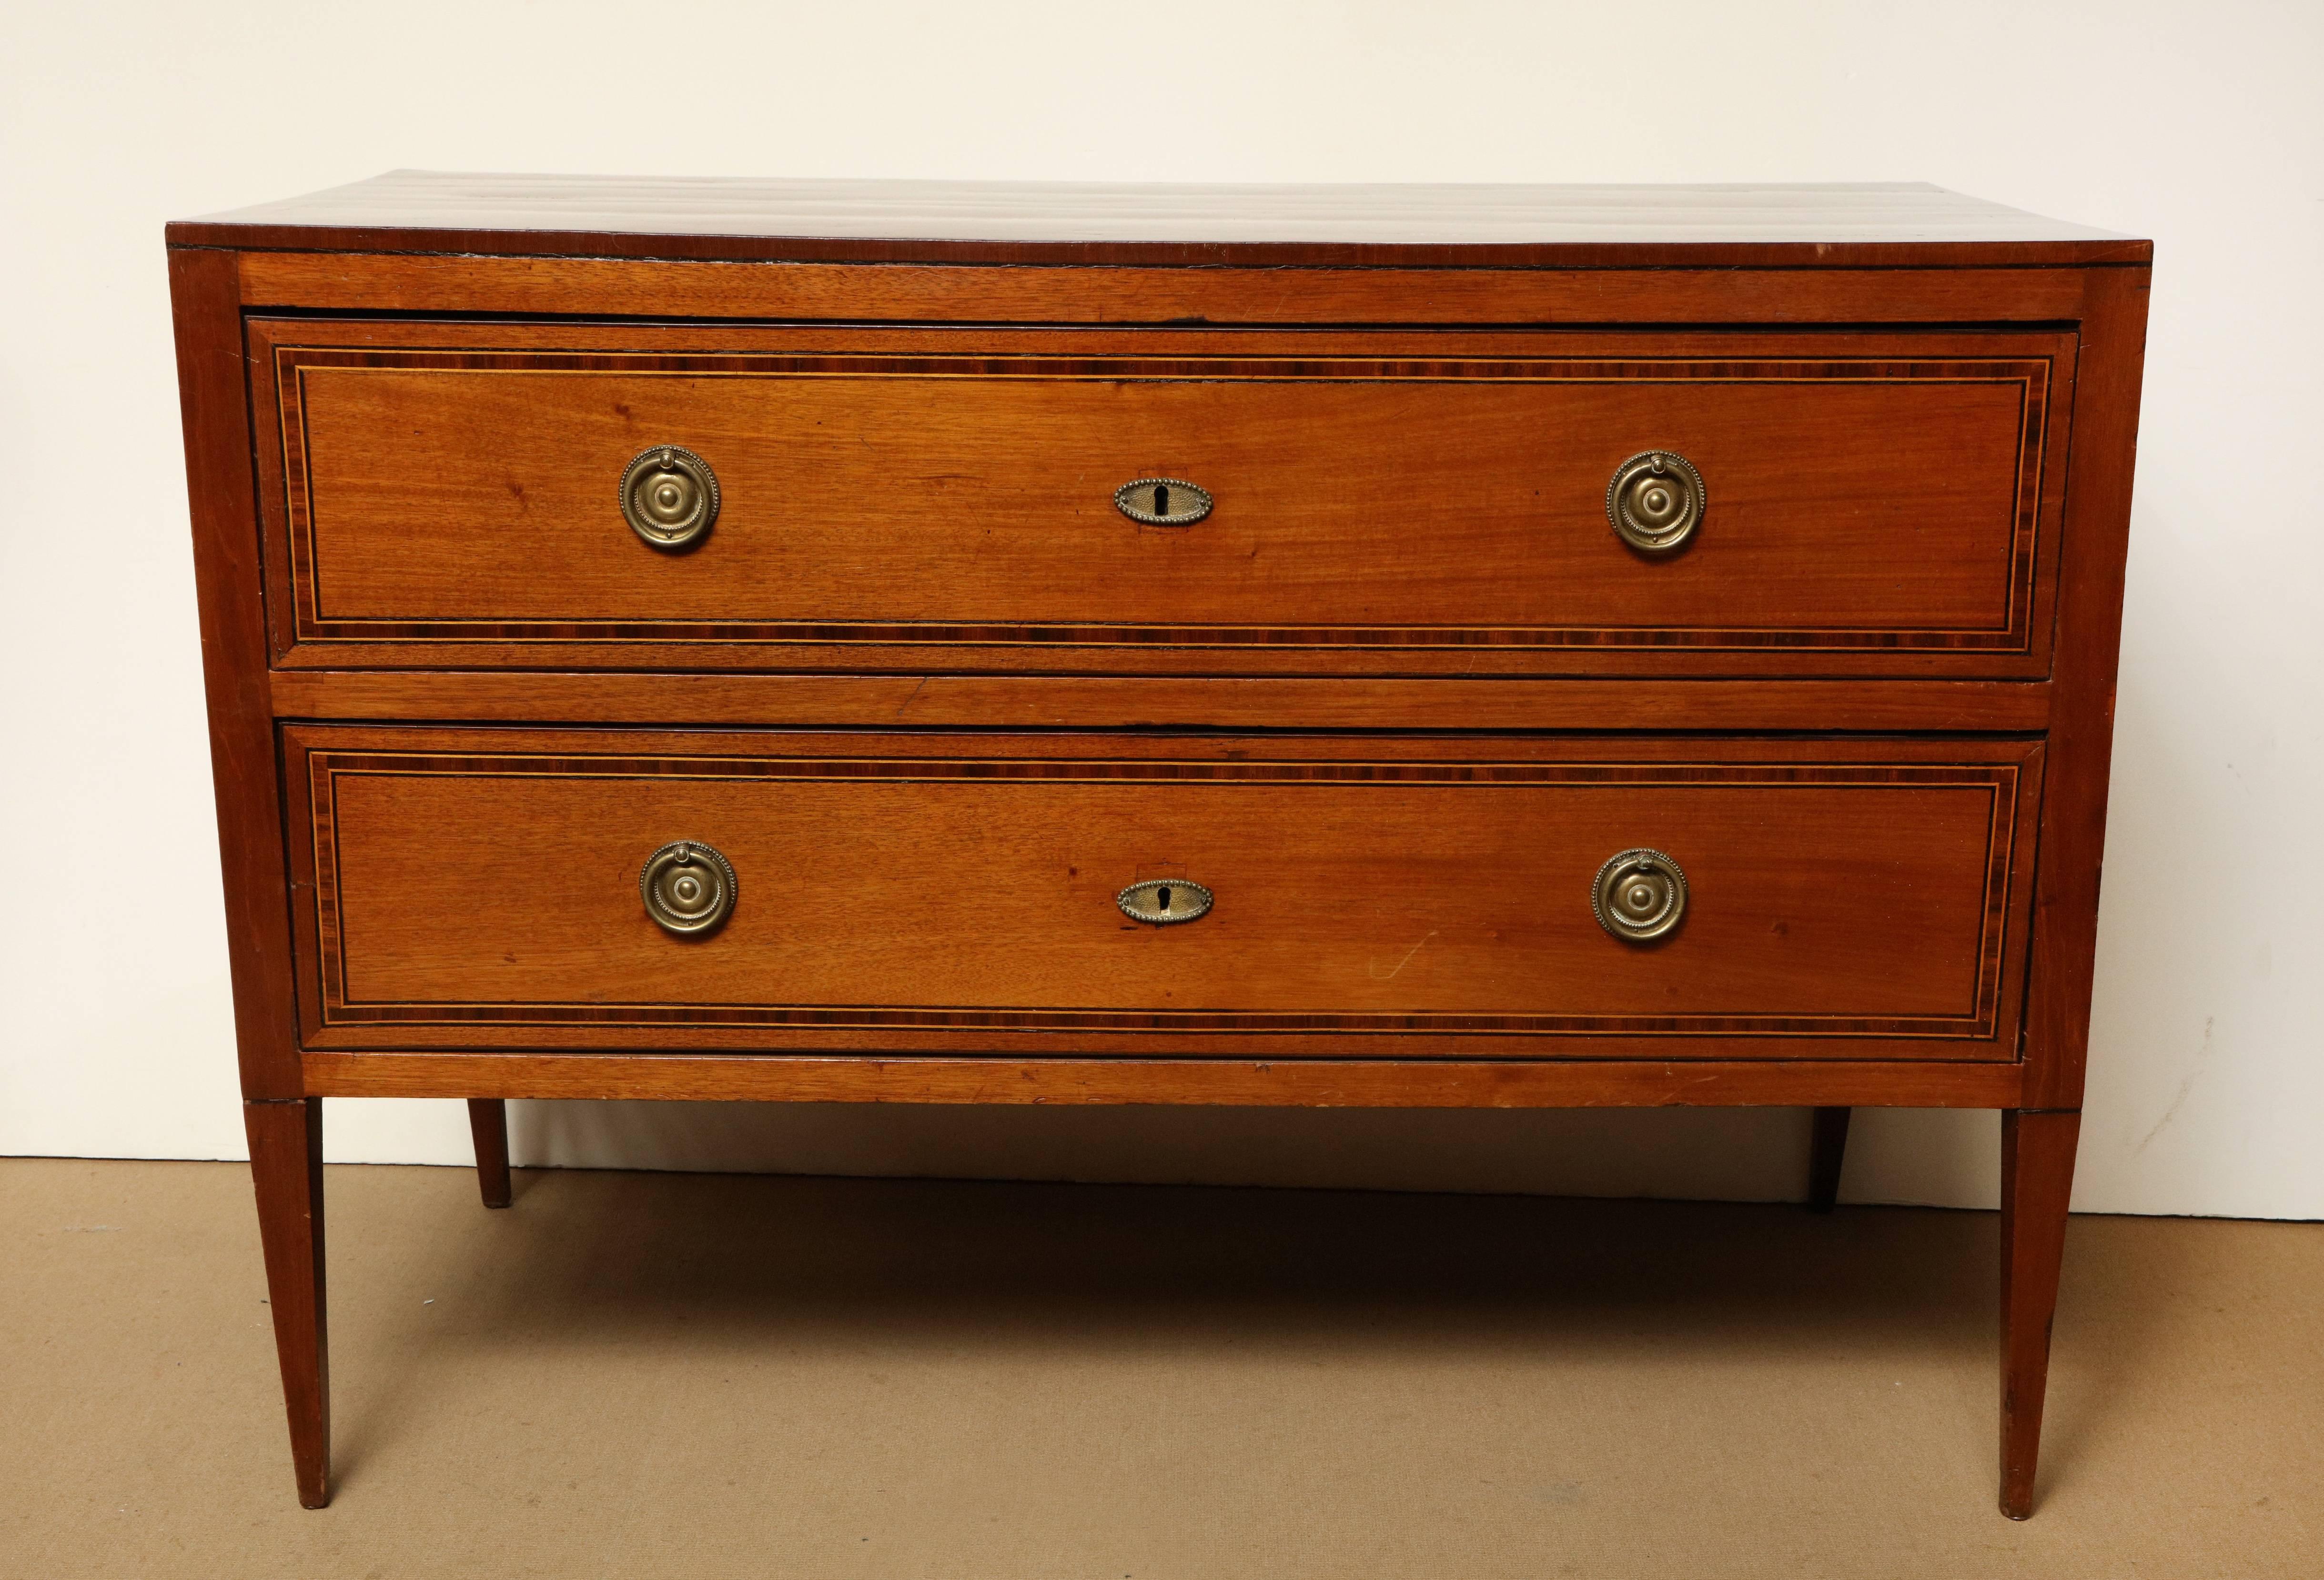 Early 19th Century Italian, Fruitwood Chest of Drawers